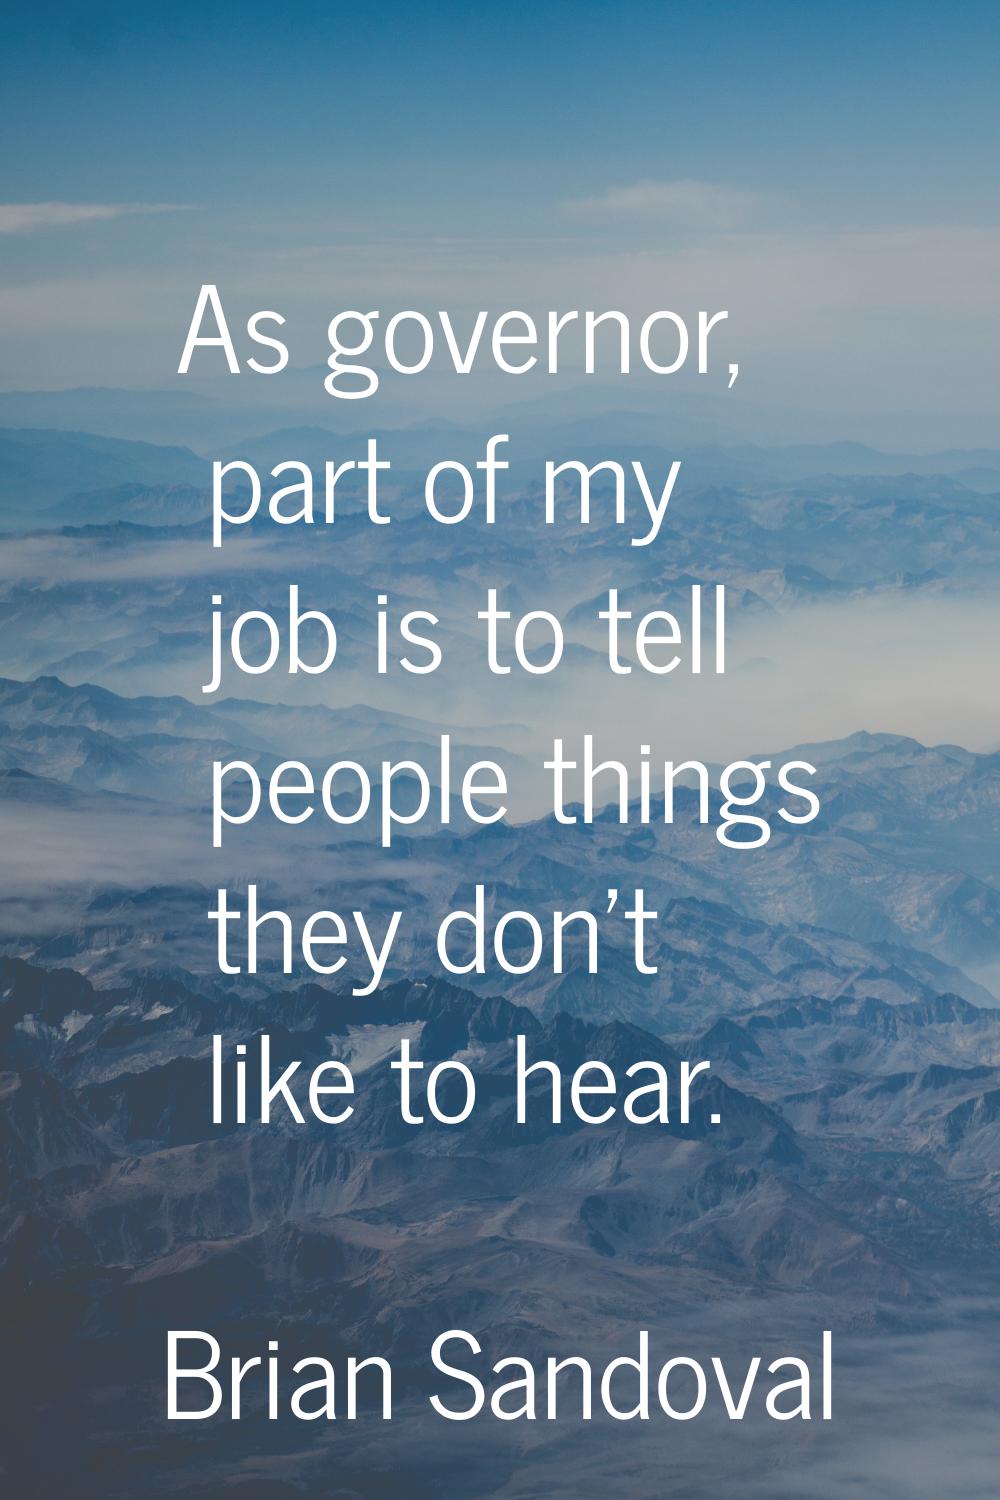 As governor, part of my job is to tell people things they don't like to hear.